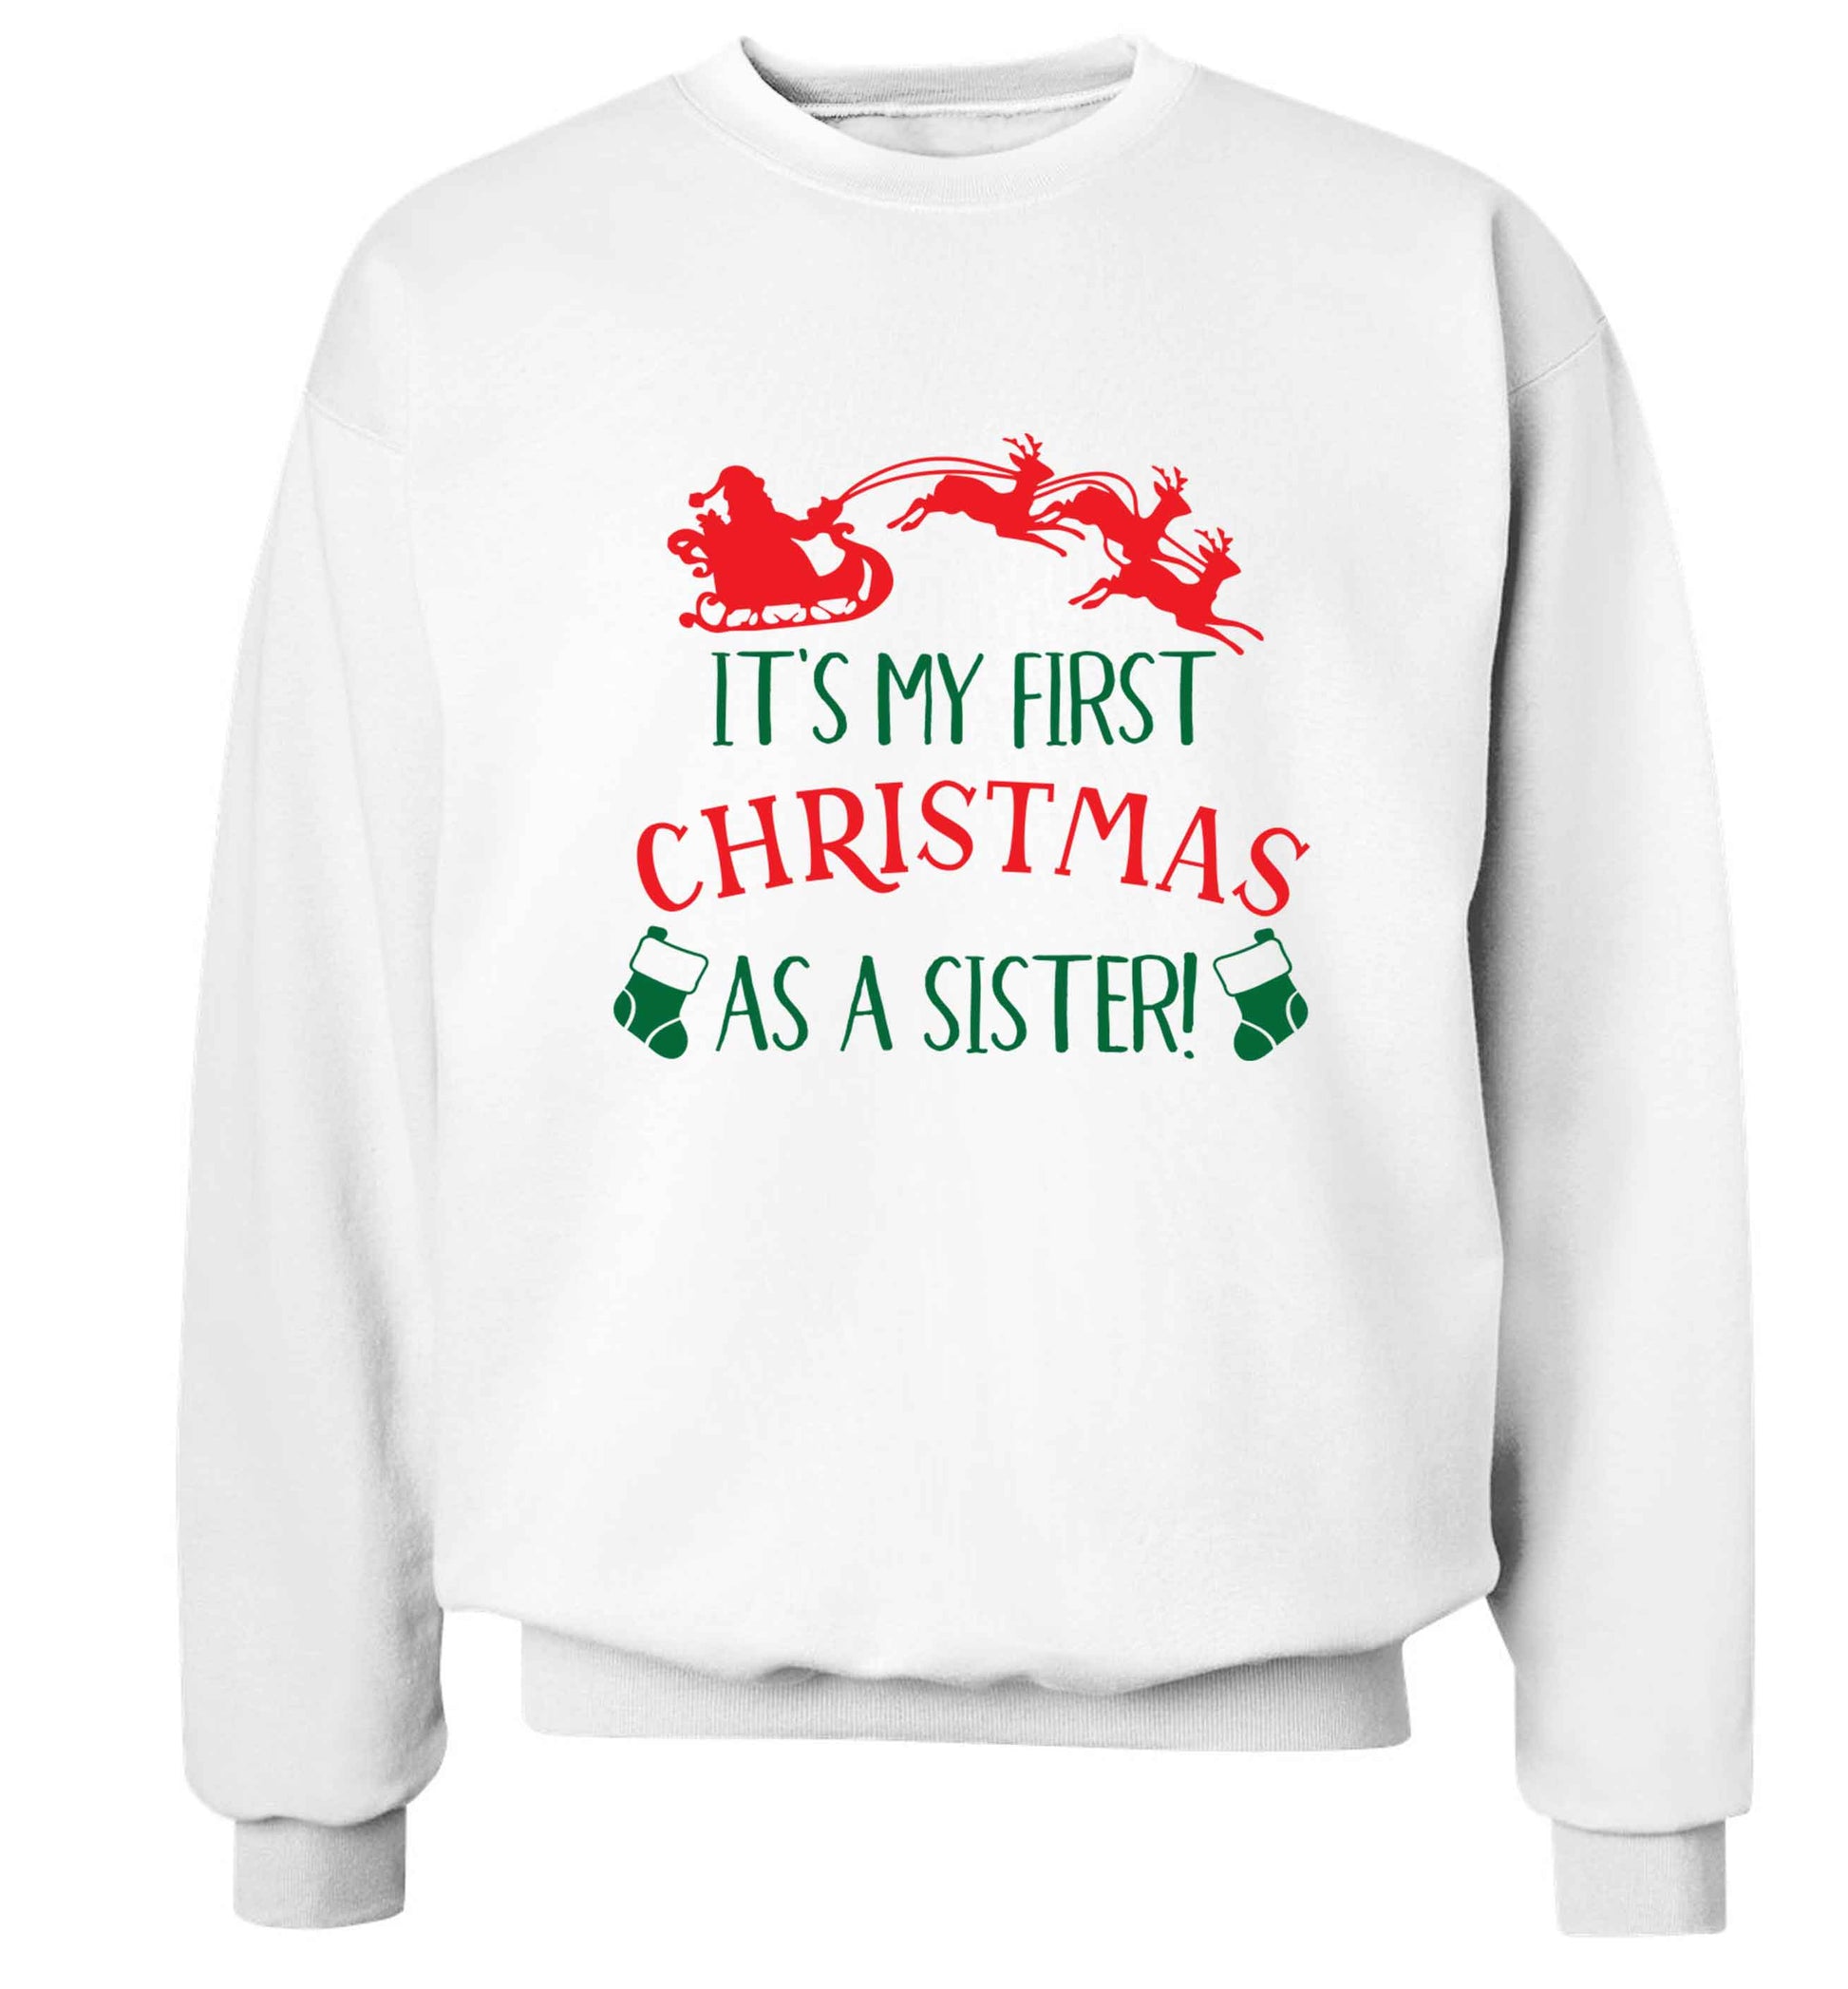 It's my first Christmas as a sister! Adult's unisex white Sweater 2XL